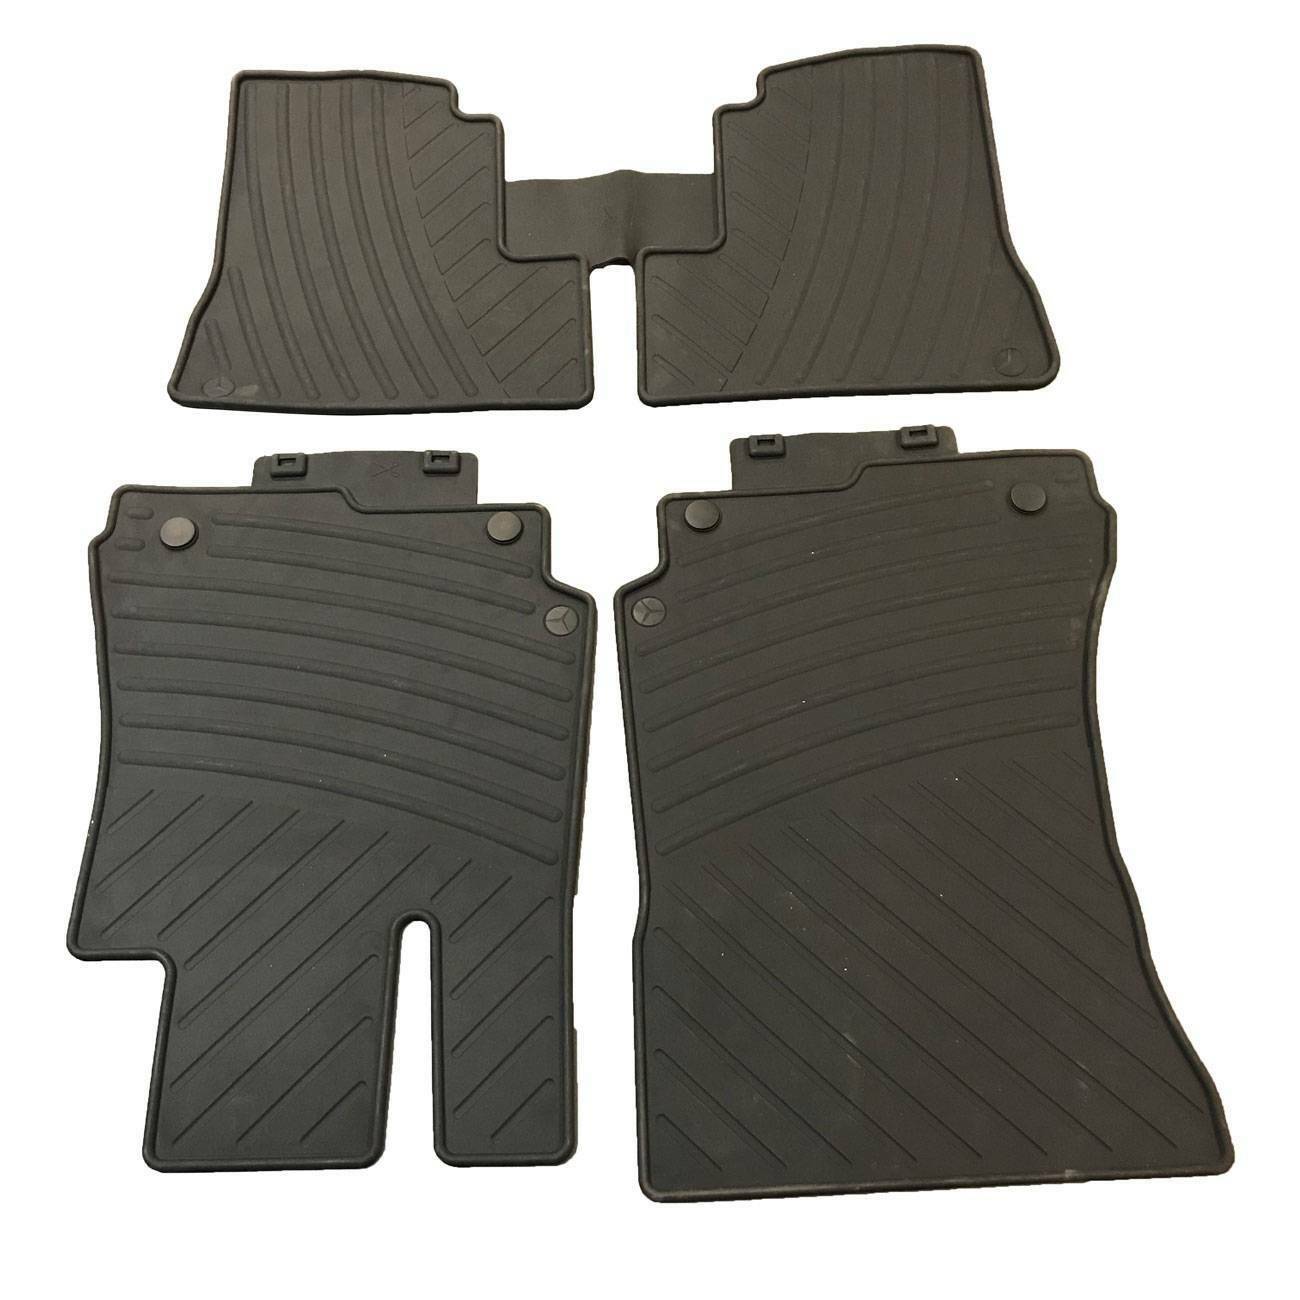 Left Hand Drive Rubber All Weather Base Mats for Mercedes S-Class W221 05-13 4M German Made